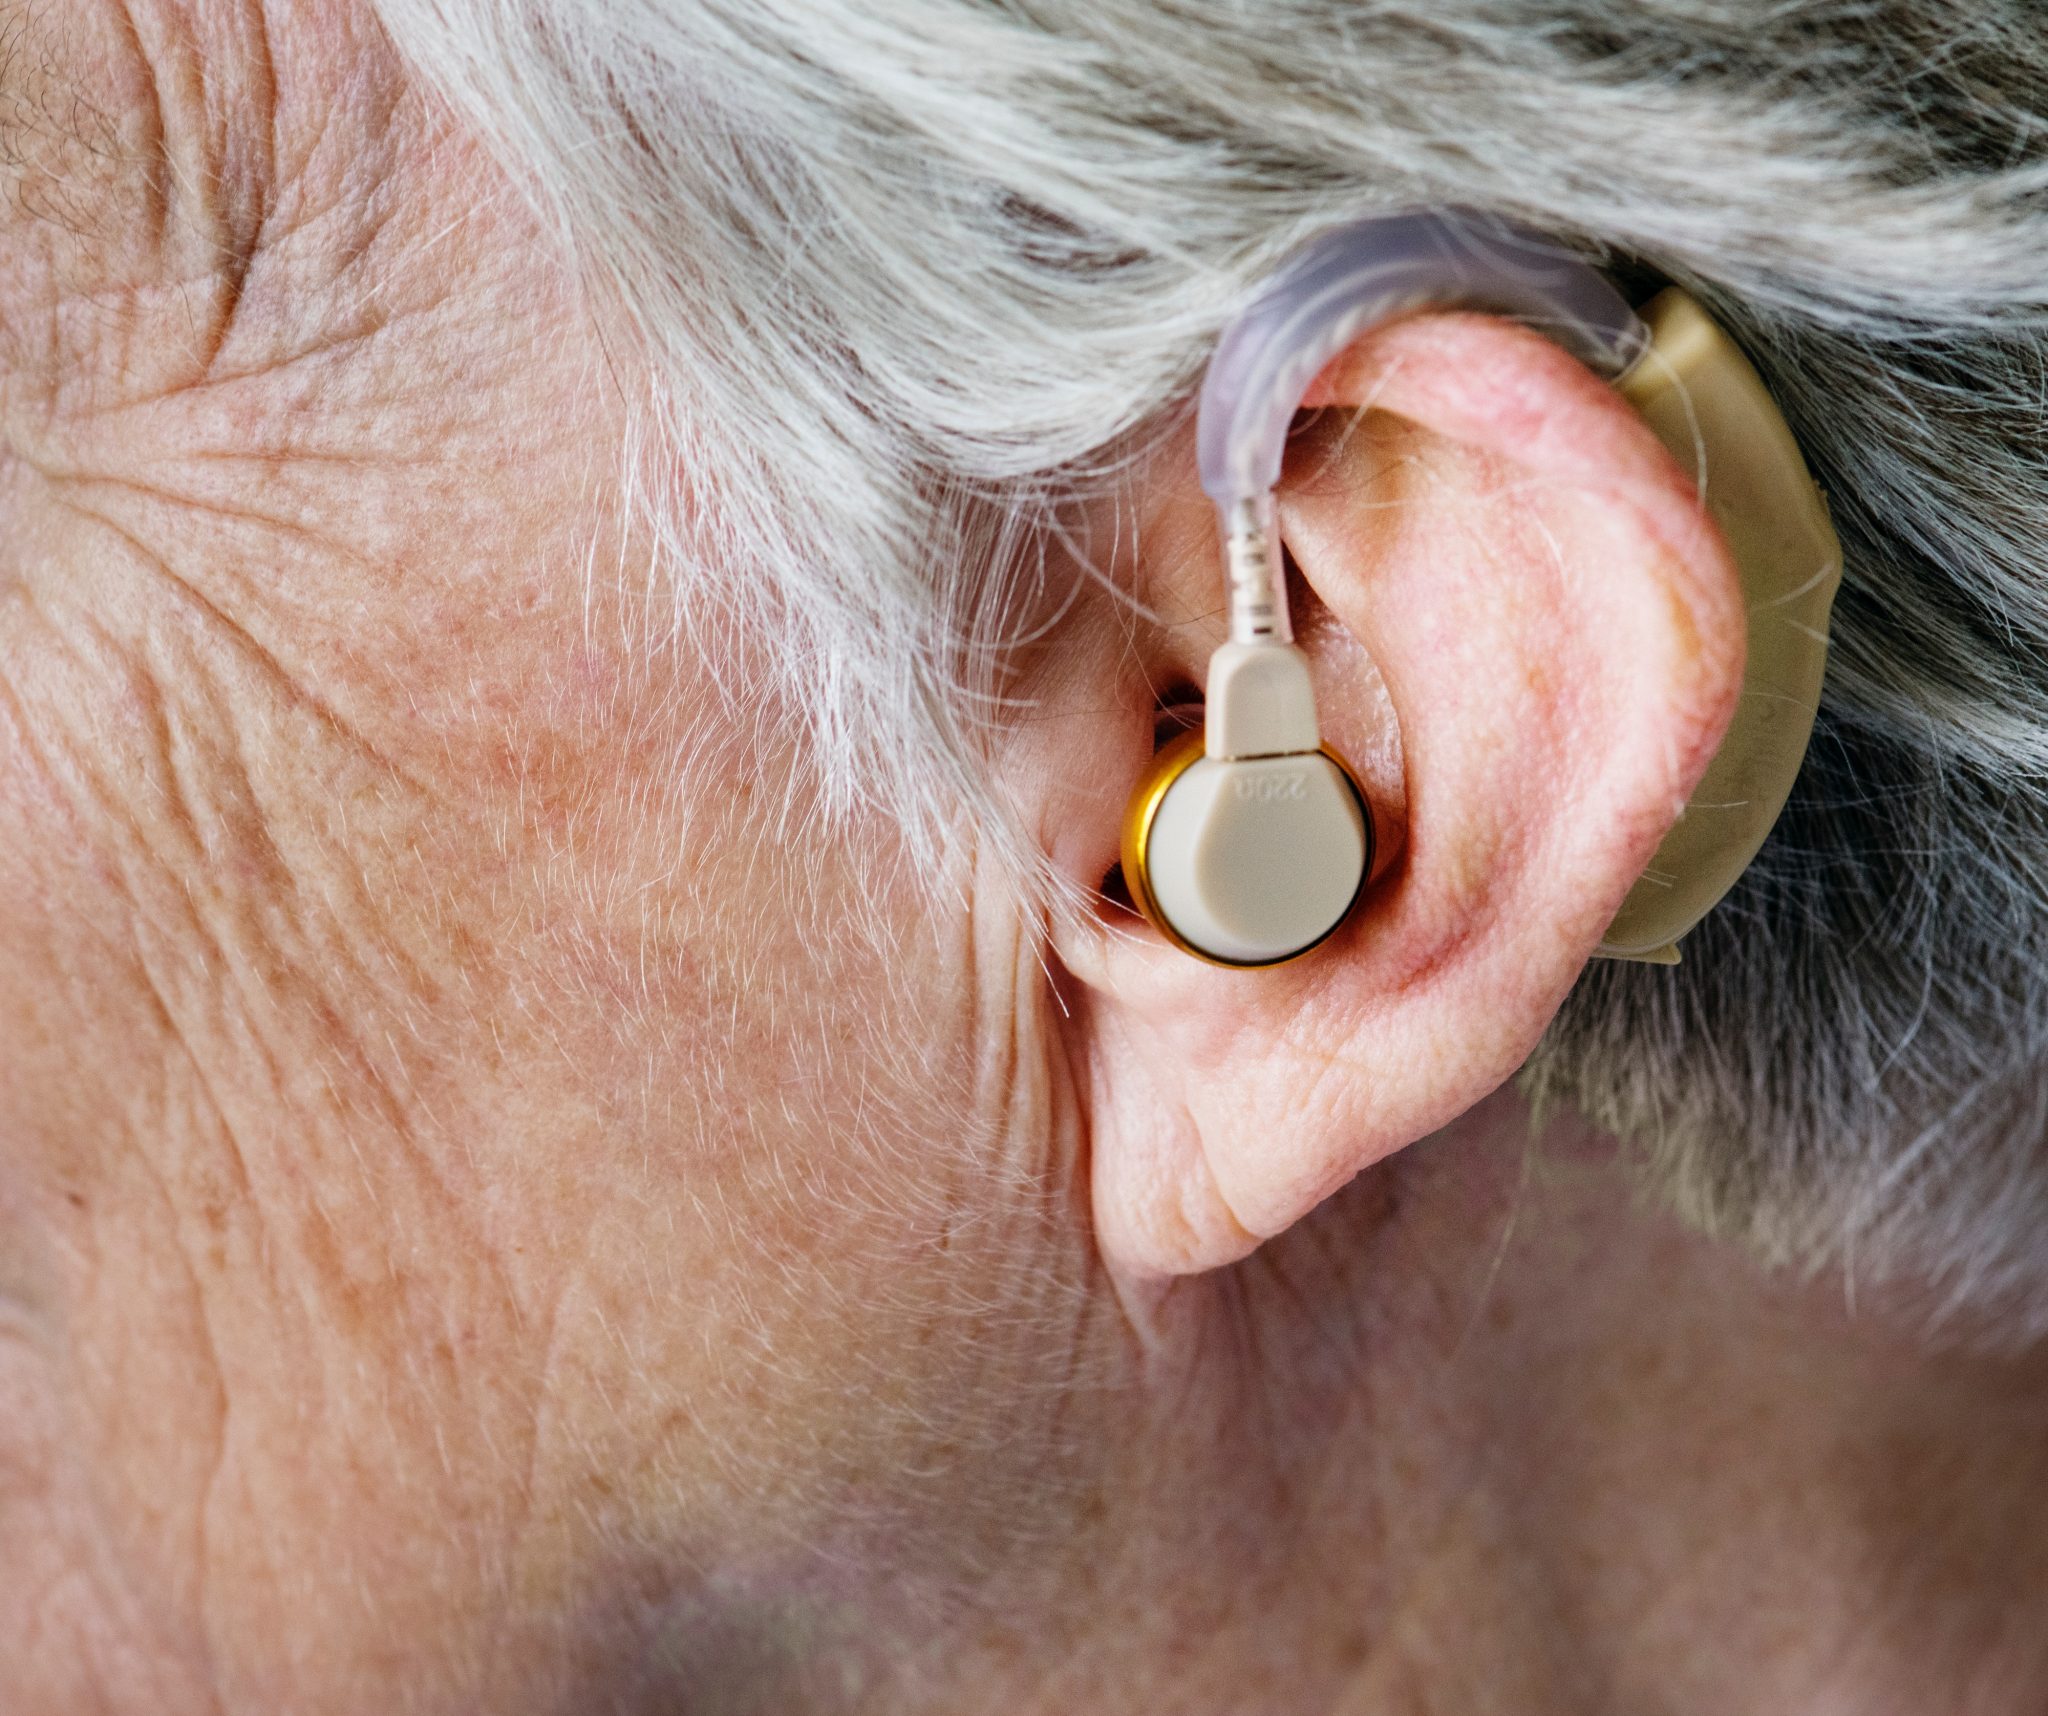 Hearing Aid Care & Cleaning